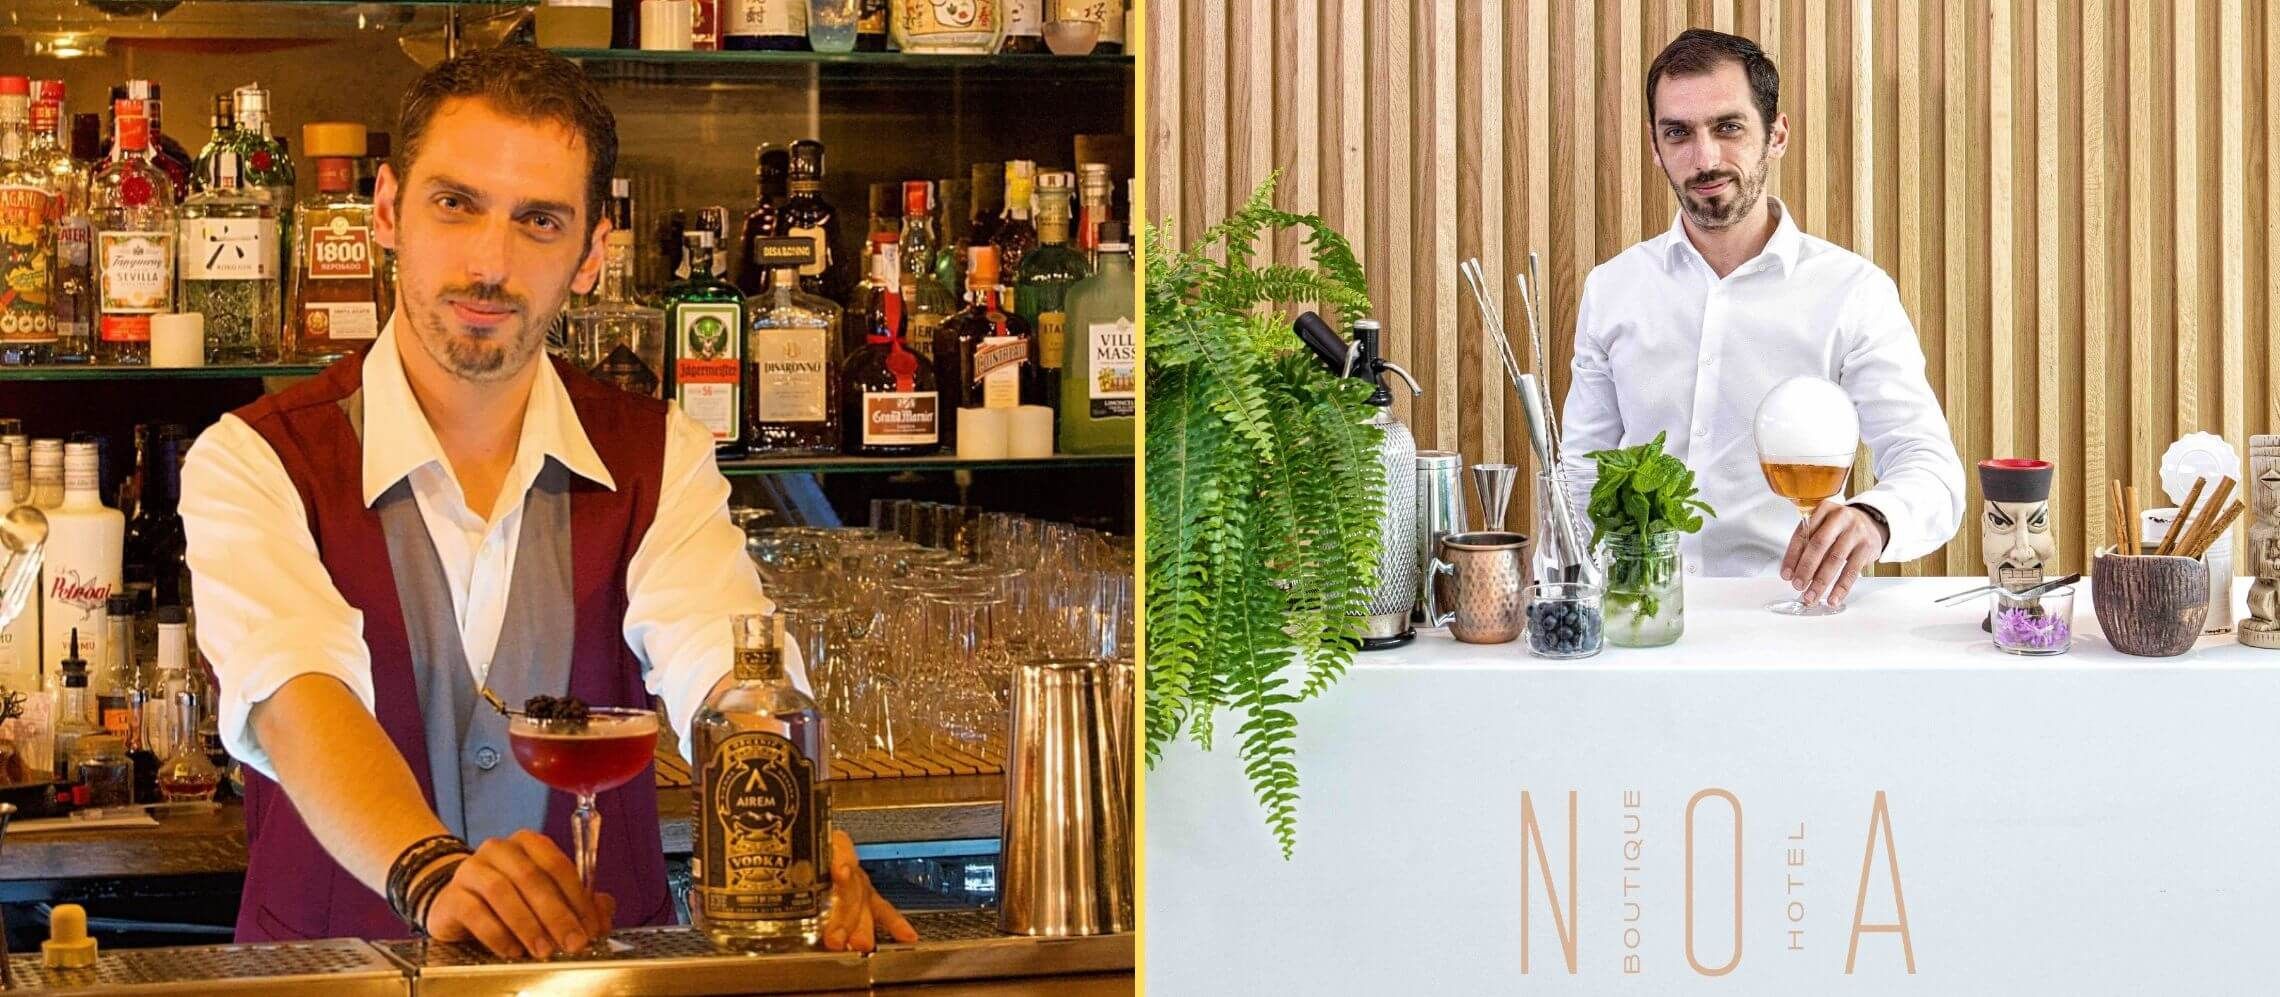 Photo for: Alberto Gómez on creating his dream drinks list at Spain’s Noa Boutique Hotel